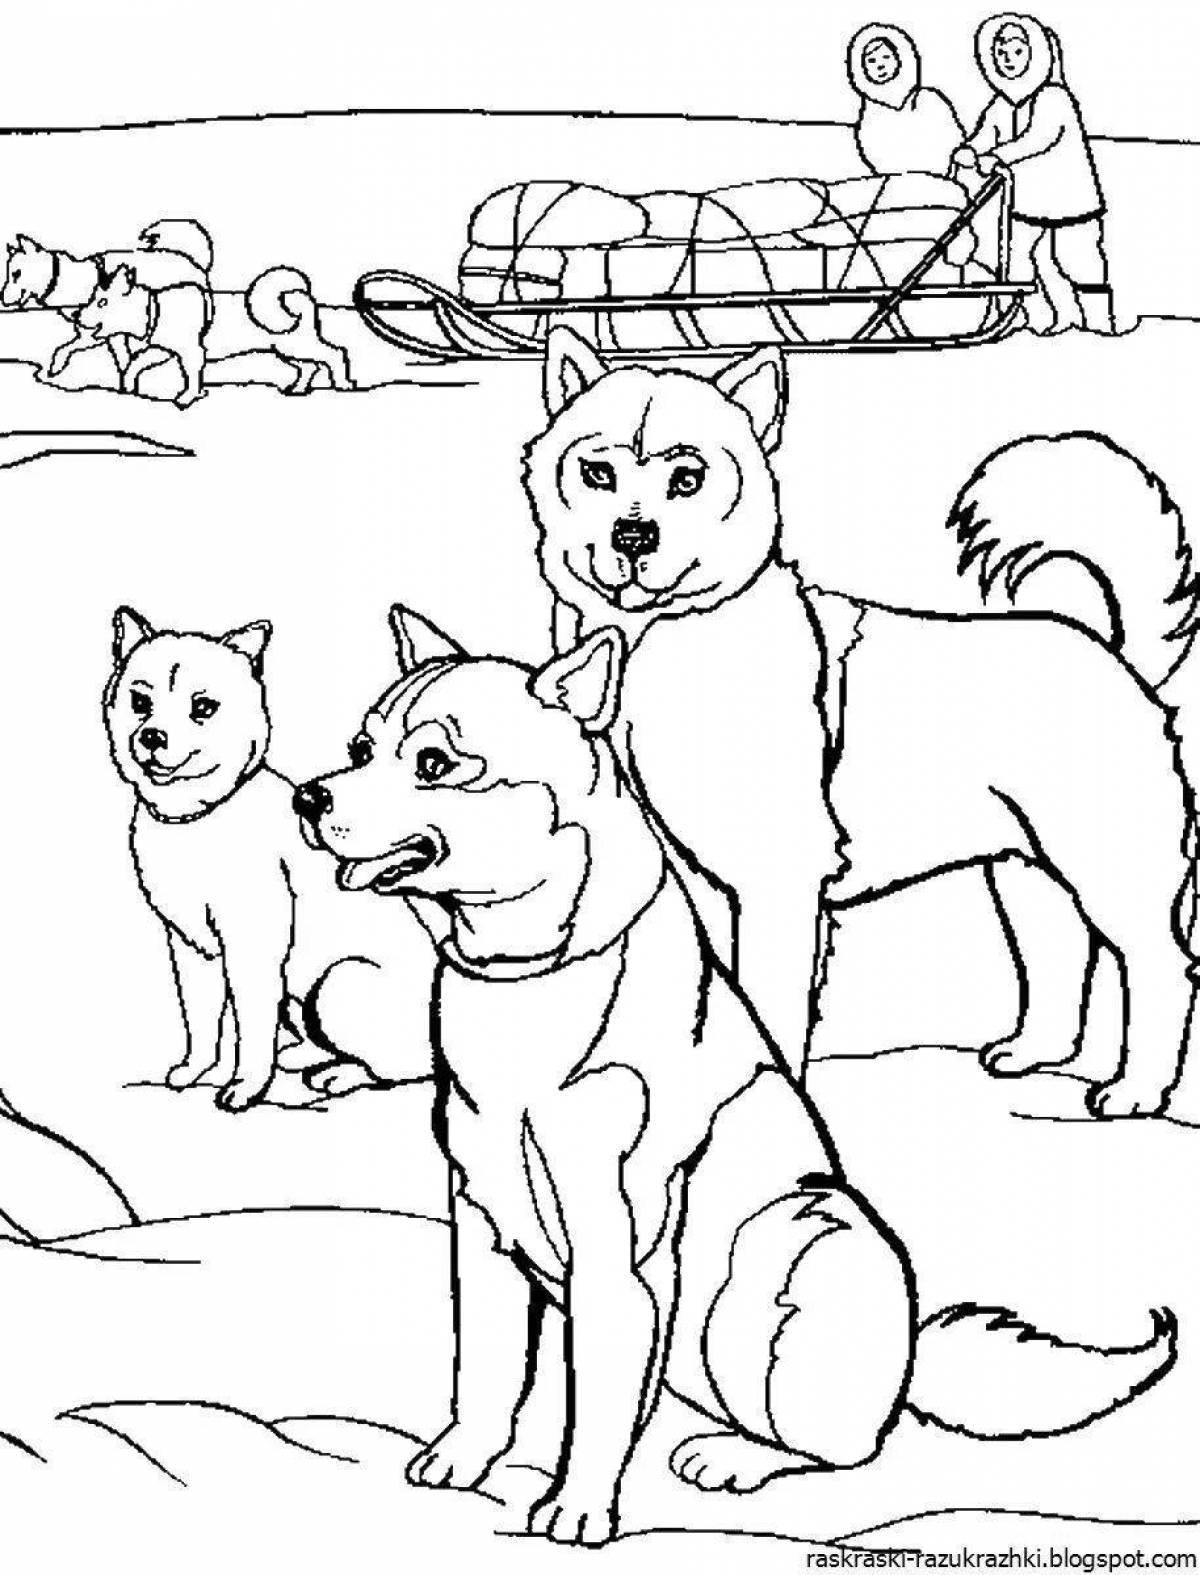 Great husky coloring book for kids